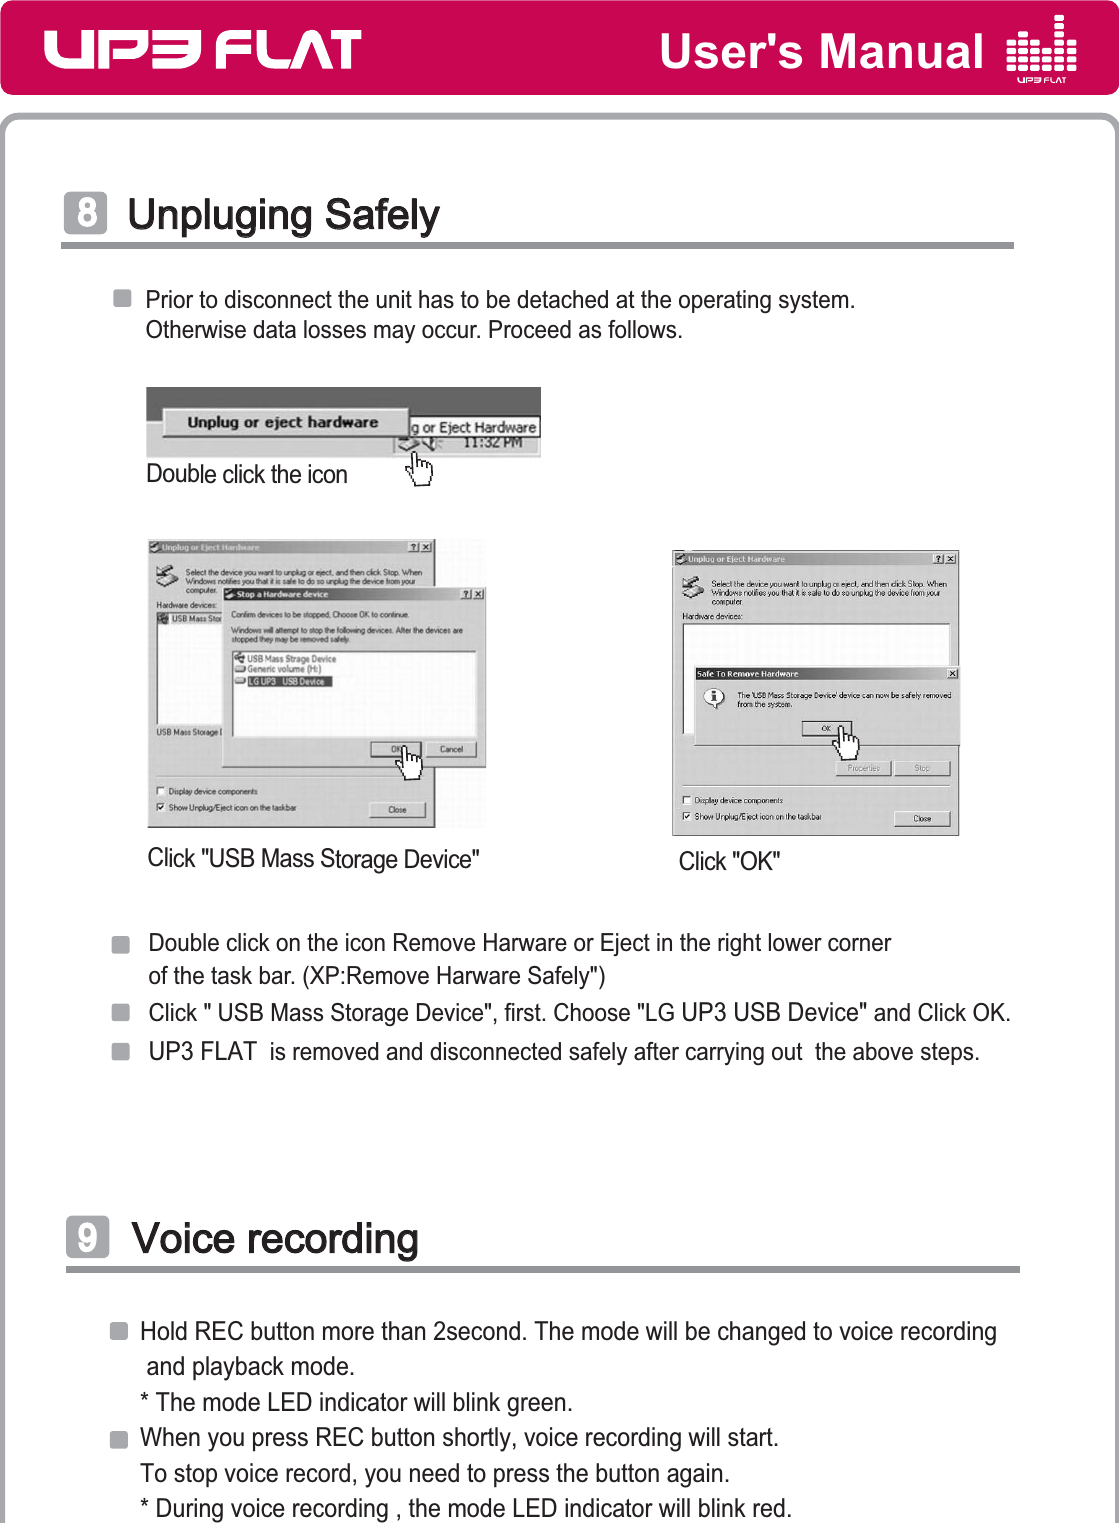 User&apos;s ManualVoice recordingVoice recordingͪHold REC button more than 2second. The mode will be changed to voice recording and playback mode.* The mode LED indicator will blink green.When you press REC button shortly, voice recording will start.To stop voice record, you need to press the button again.  * During voice recording , the mode LED indicator will blink red.Prior to disconnect the unit has to be detached at the operating system.Otherwise data losses may occur. Proceed as follows.Click &quot;USB Mass Storage Device&quot; Click &quot;OK&quot;UP3 FLAT  is removed and disconnected safely after carrying out  the above steps.Click &quot; USB Mass Storage Device&quot;, first. Choose &quot;LG UP3 USB Device&quot; and Click OK.Double click on the icon Remove Harware or Eject in the right lower corner of the task bar. (XP:Remove Harware Safely&quot;)Double click the iconUnpluging SafelyUnpluging Safelyͩ